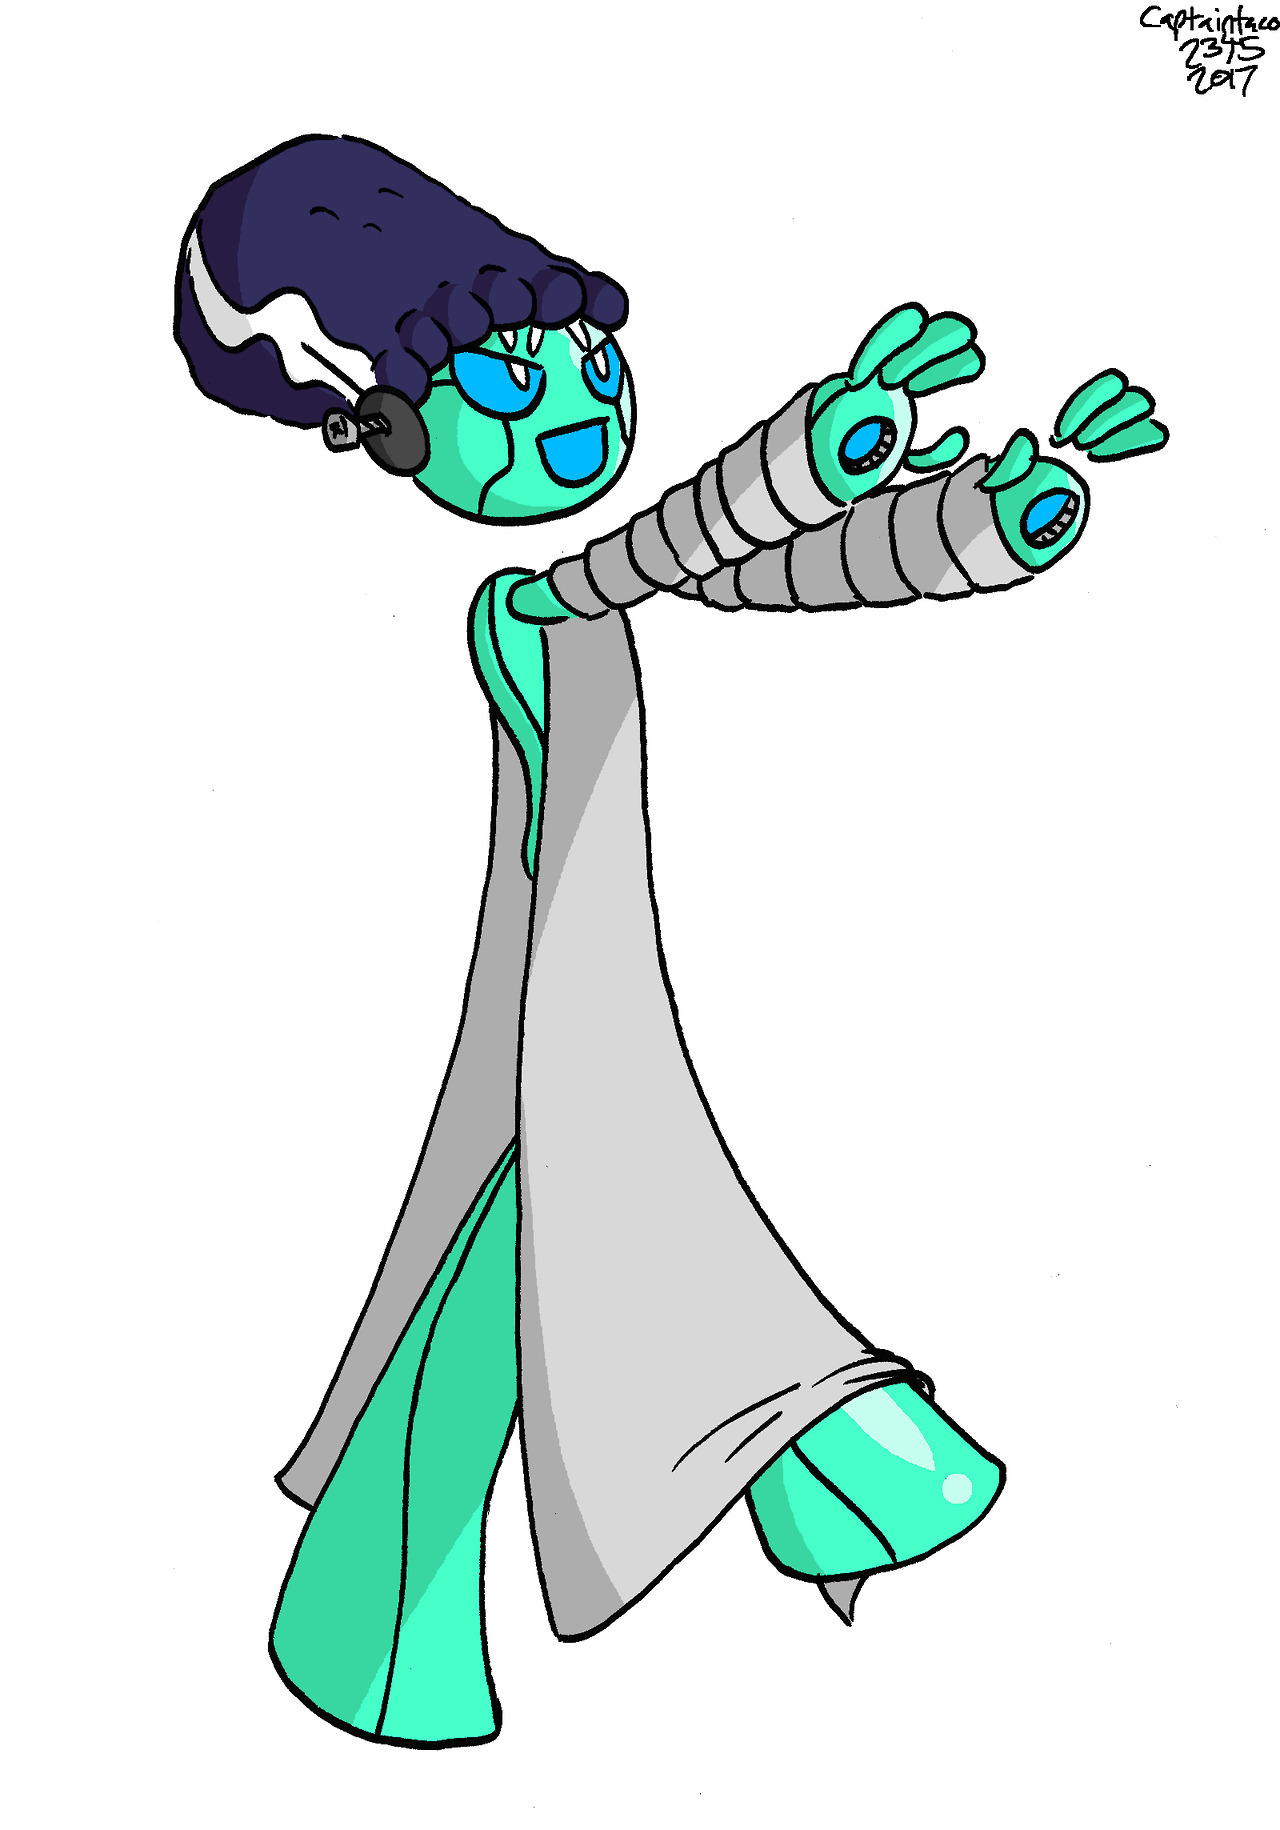 Andromeda dressed as the Bride of Frankenstein for Halloween. I haven’t drawn Andromeda